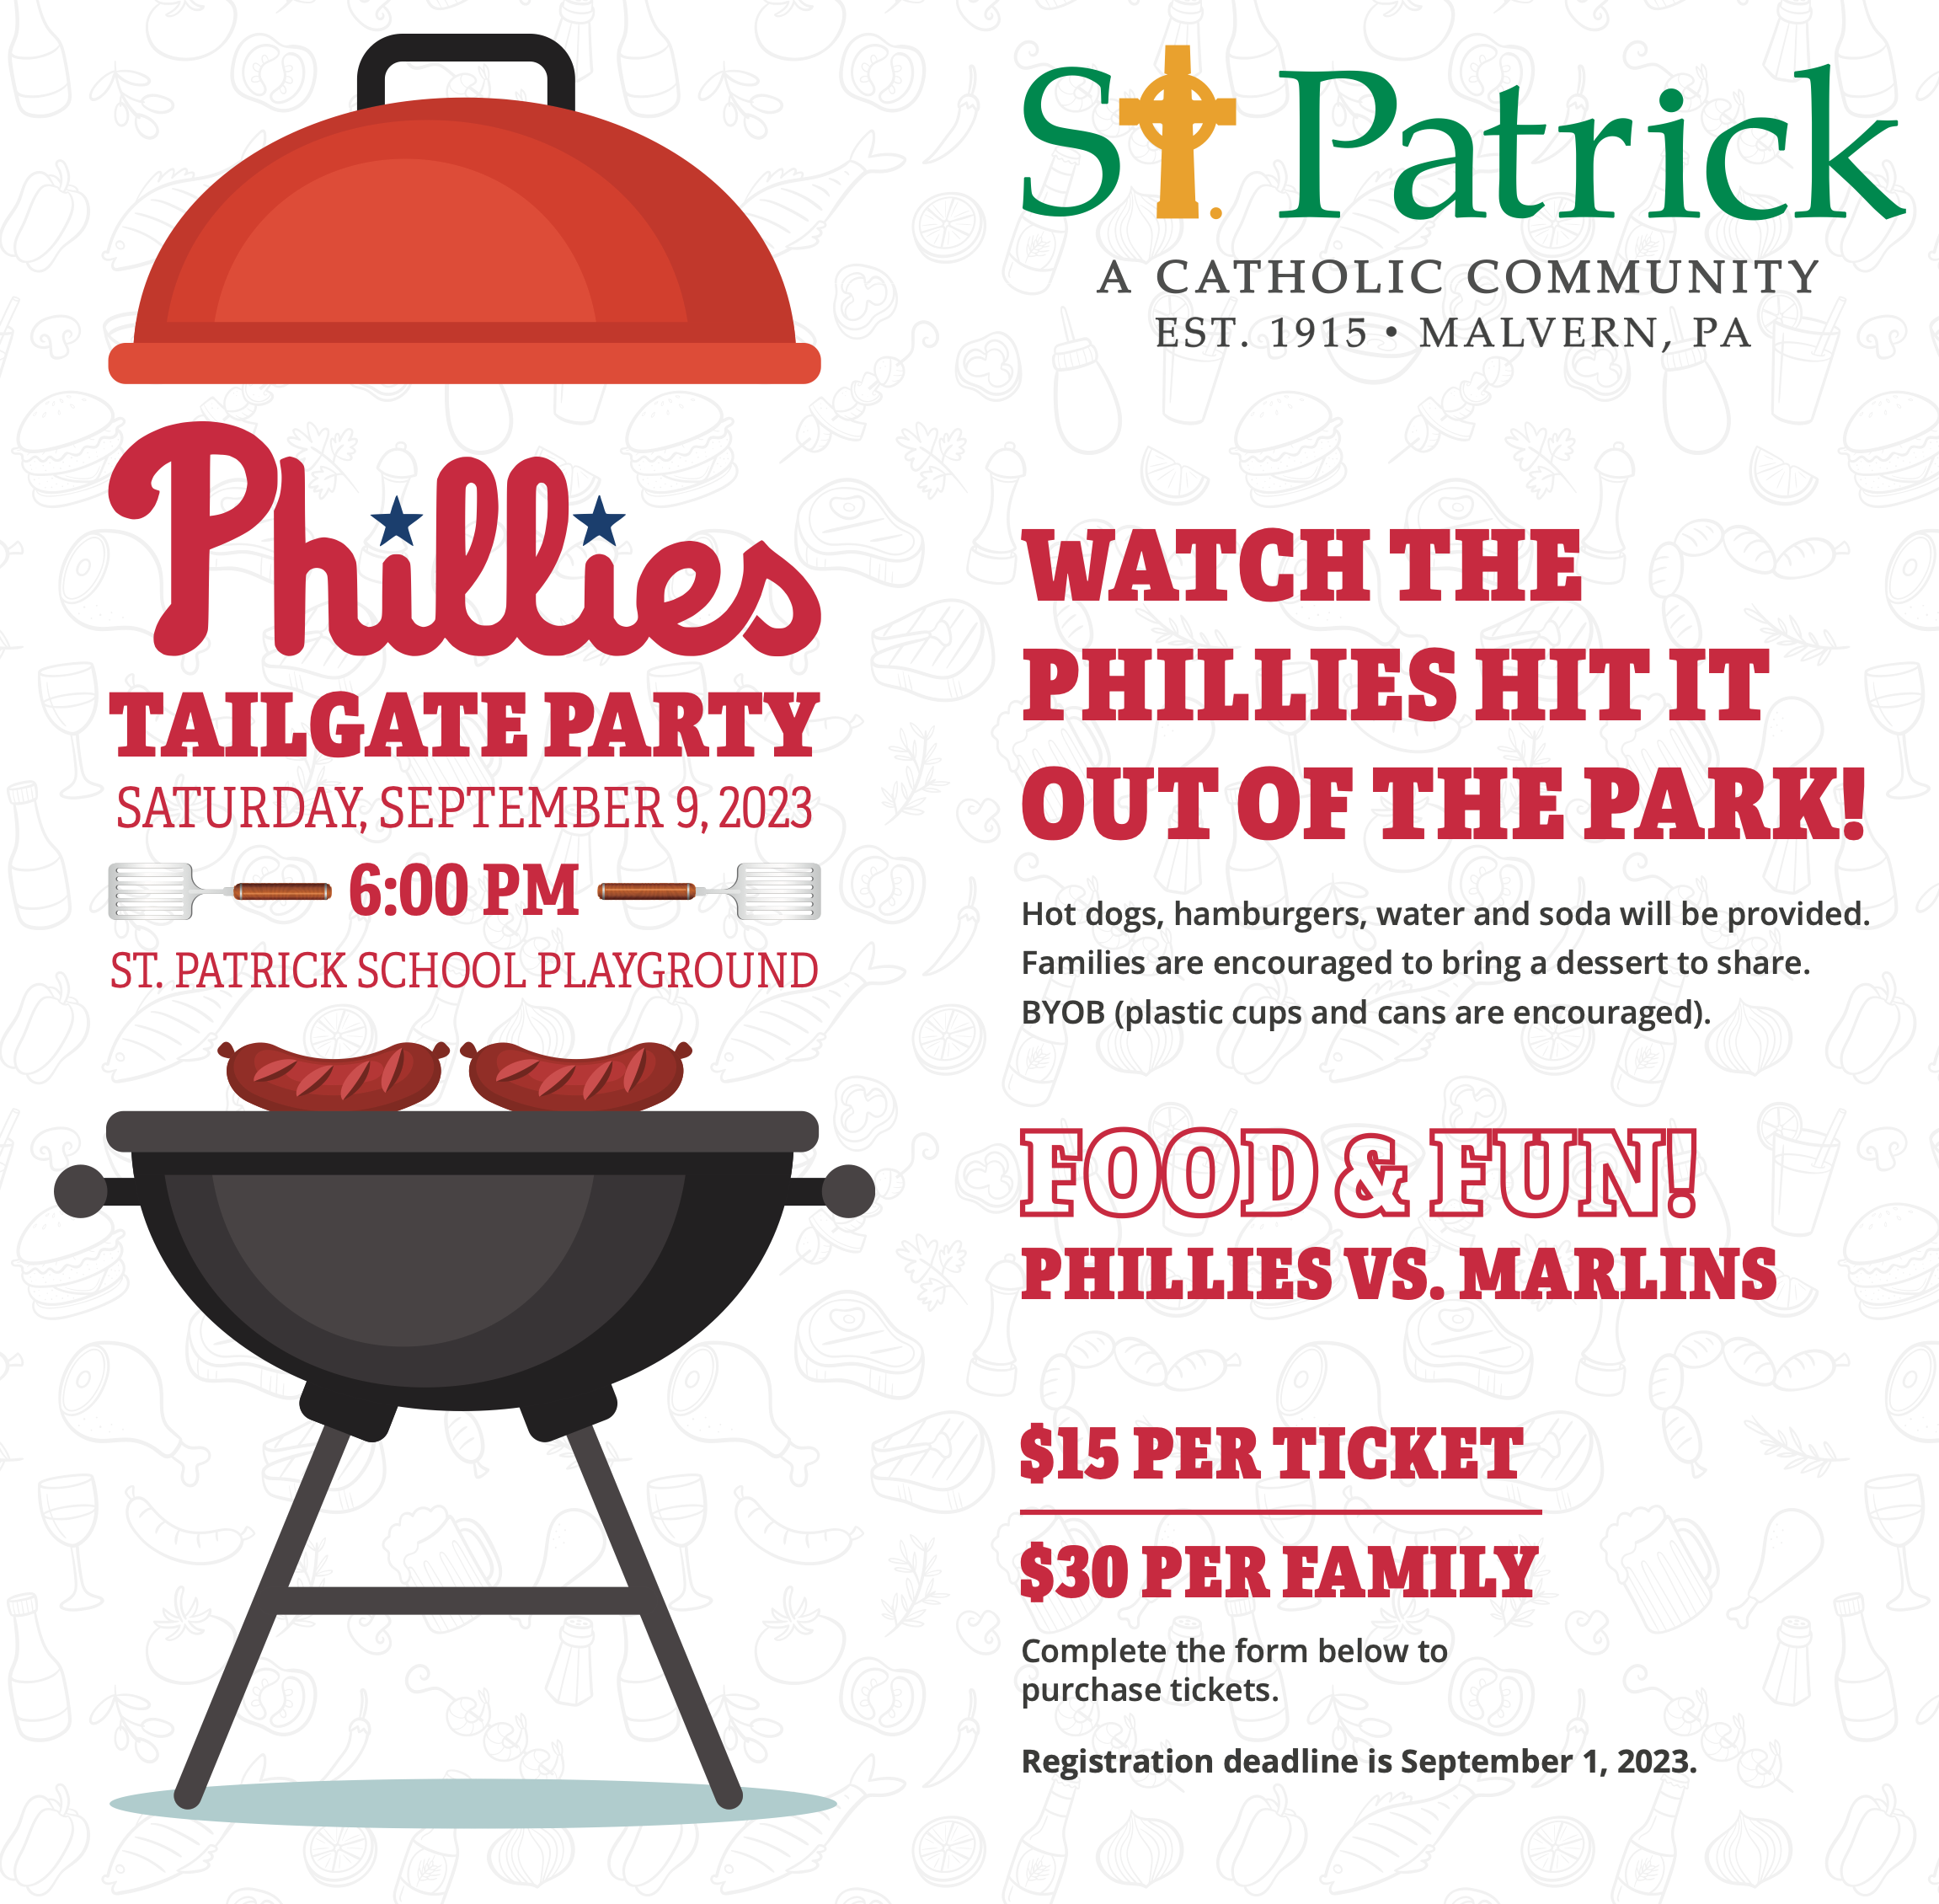 Phillies Tailgate Party Saturday, September 9, 2023 - 6:00PM